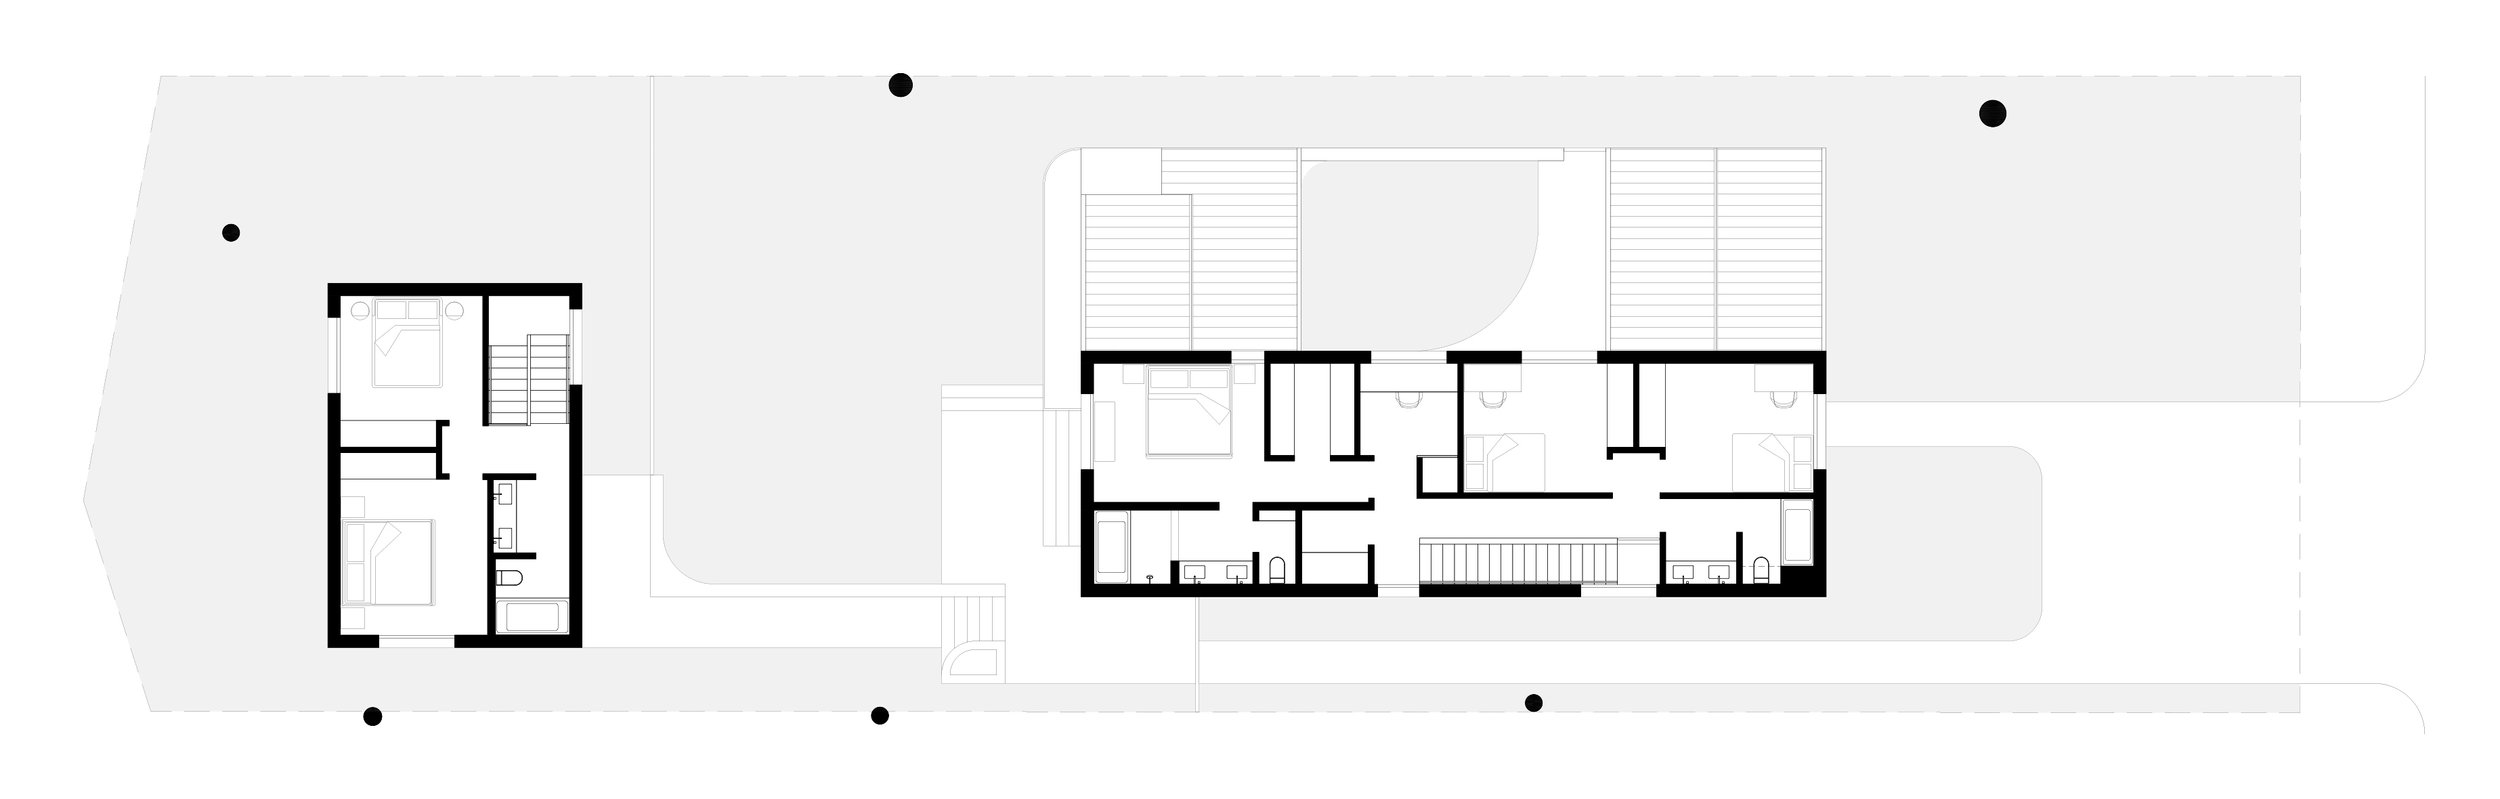 230629_House Courtyard House - Graphic Plans_0003.jpg